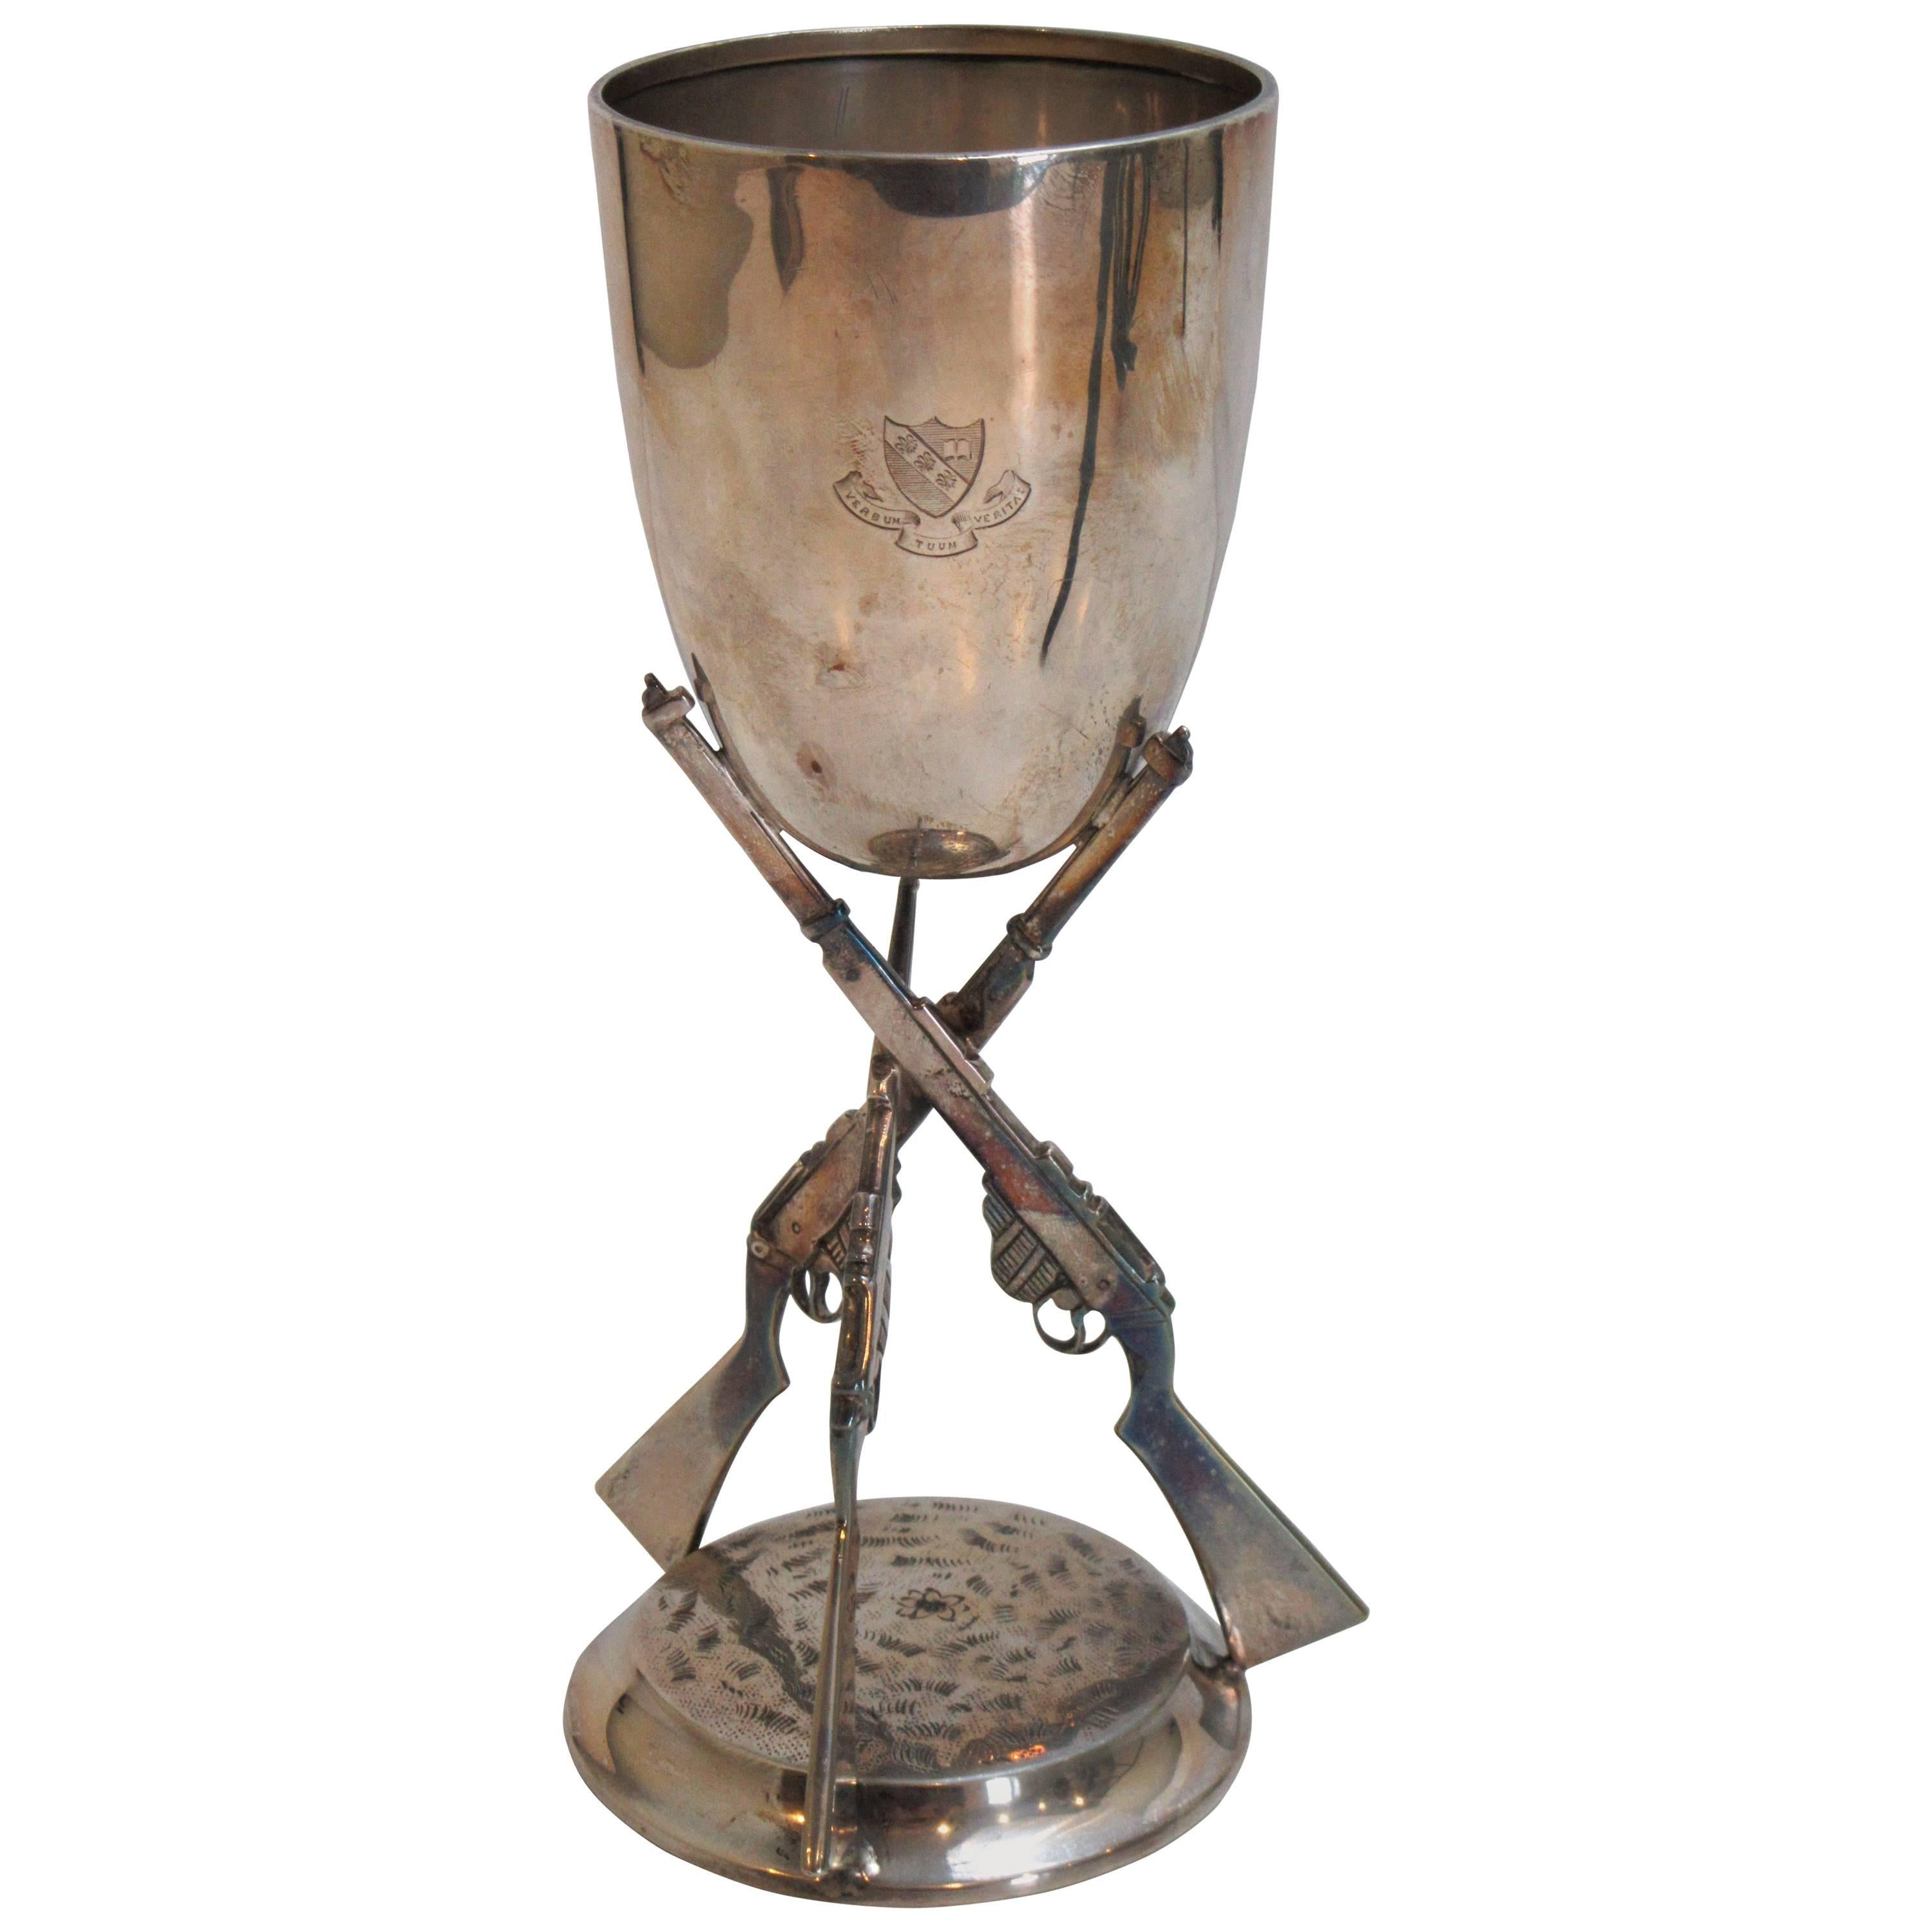 English Sterling Silver Trophy Chalice of the Monkton Combe School, 1912